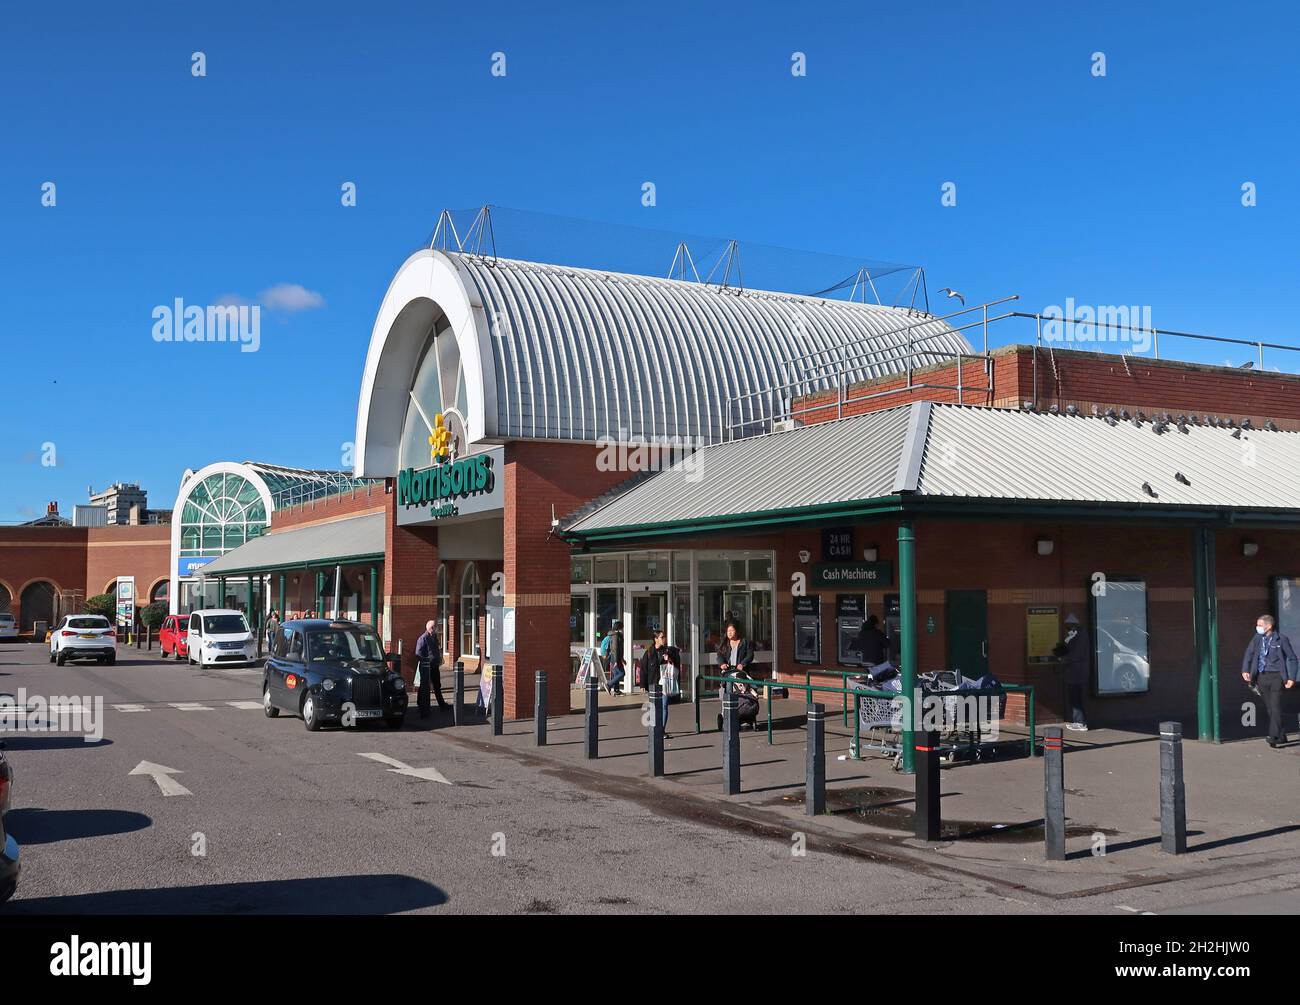 The Morrisons store in Peckham, southeast London, UK. Part of the Aylesham centre - currently the site of controversial redevelopment plans. Stock Photo